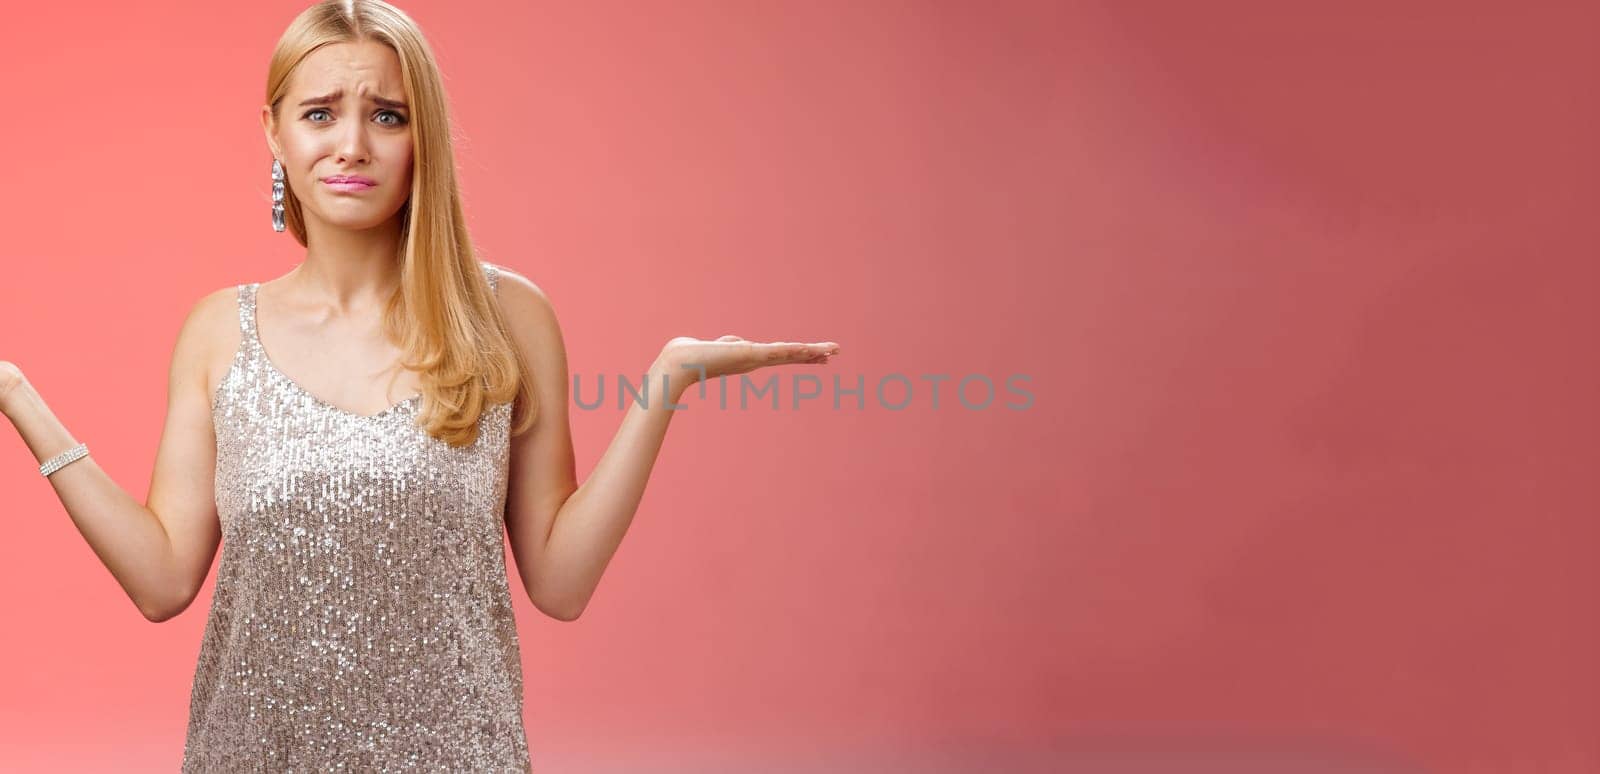 Nervous unsure doubtful cute blond woman struggle make decision shrugging pointing sideways frowning upset standing insecure feel pressure cannot decide choice make, frustrated red background by Benzoix